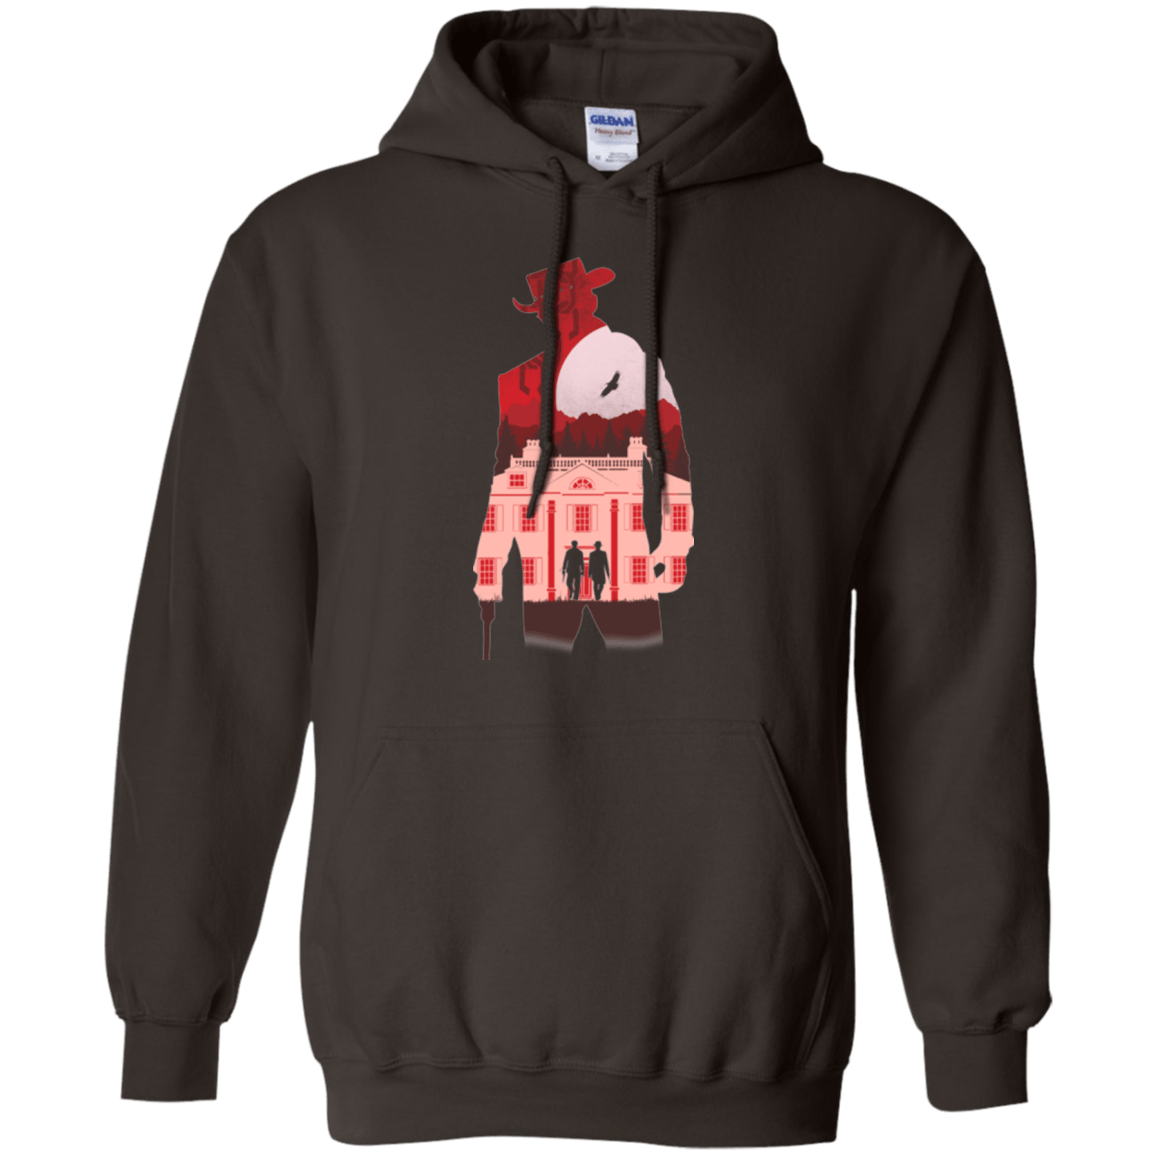 Sweatshirts Dark Chocolate / Small The D is Silent Pullover Hoodie